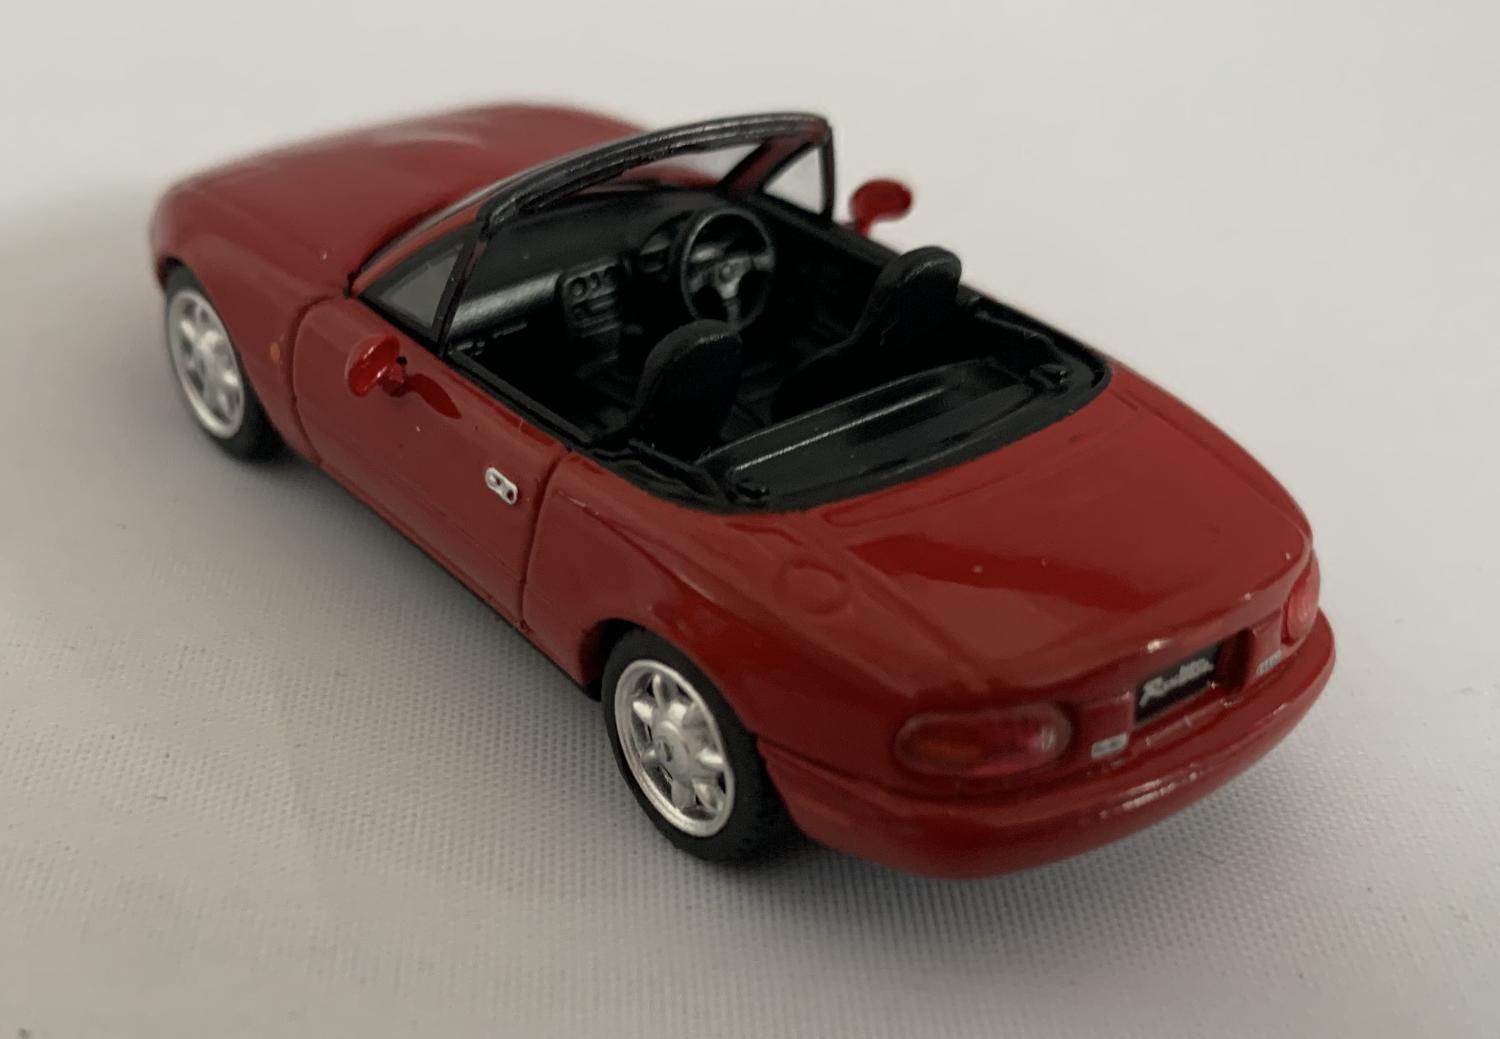 An excellent scale model of a Eunos Roadster decorated in classic red with silver wheels.